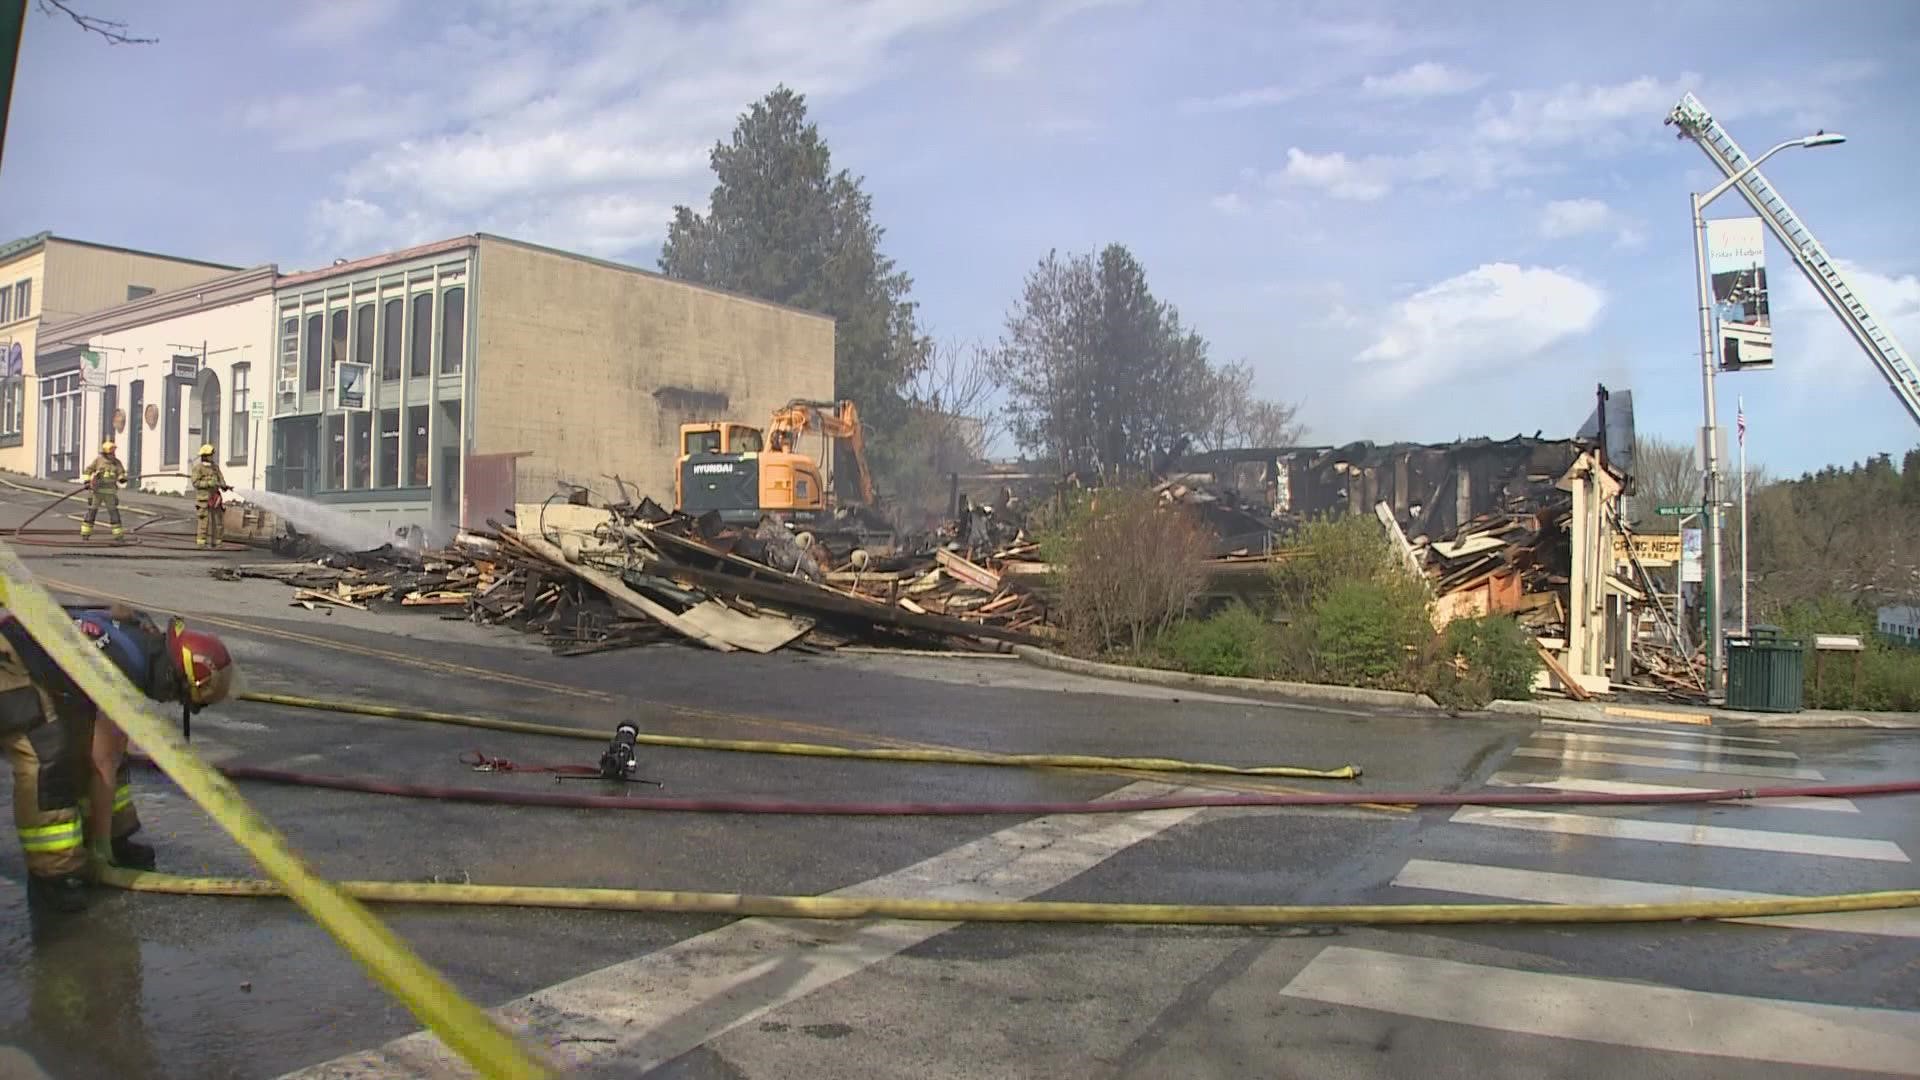 Four businesses were destroyed April 7 when a fire broke out early in the morning.